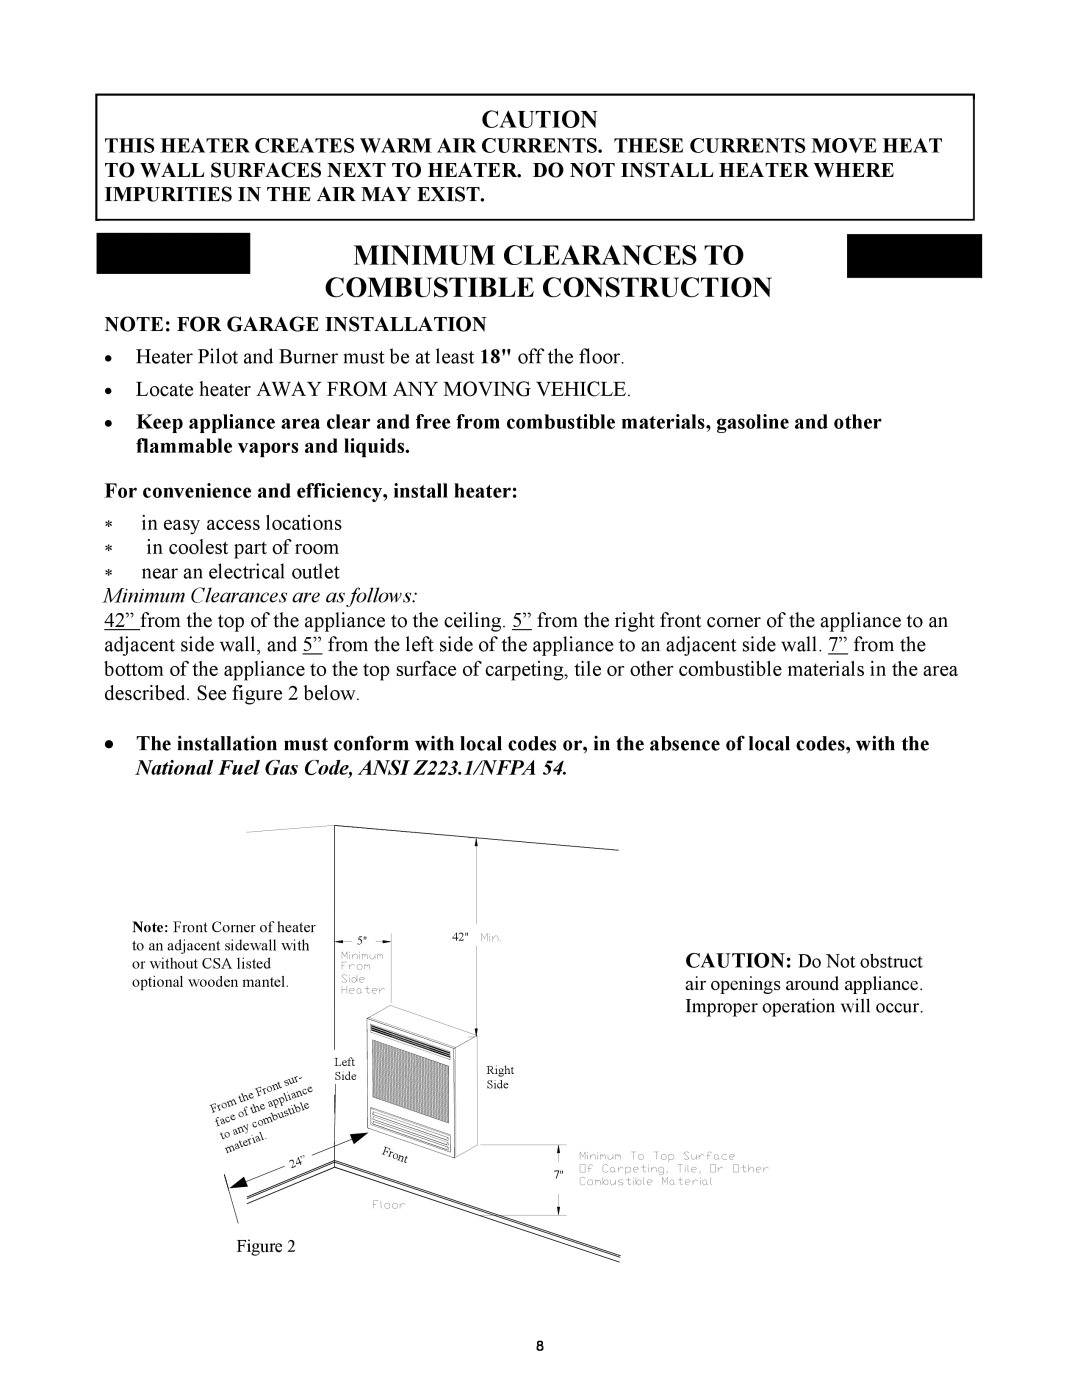 New Buck Corporation 1127B manual Minimum Clearances To Combustible Construction, Note For Garage Installation 